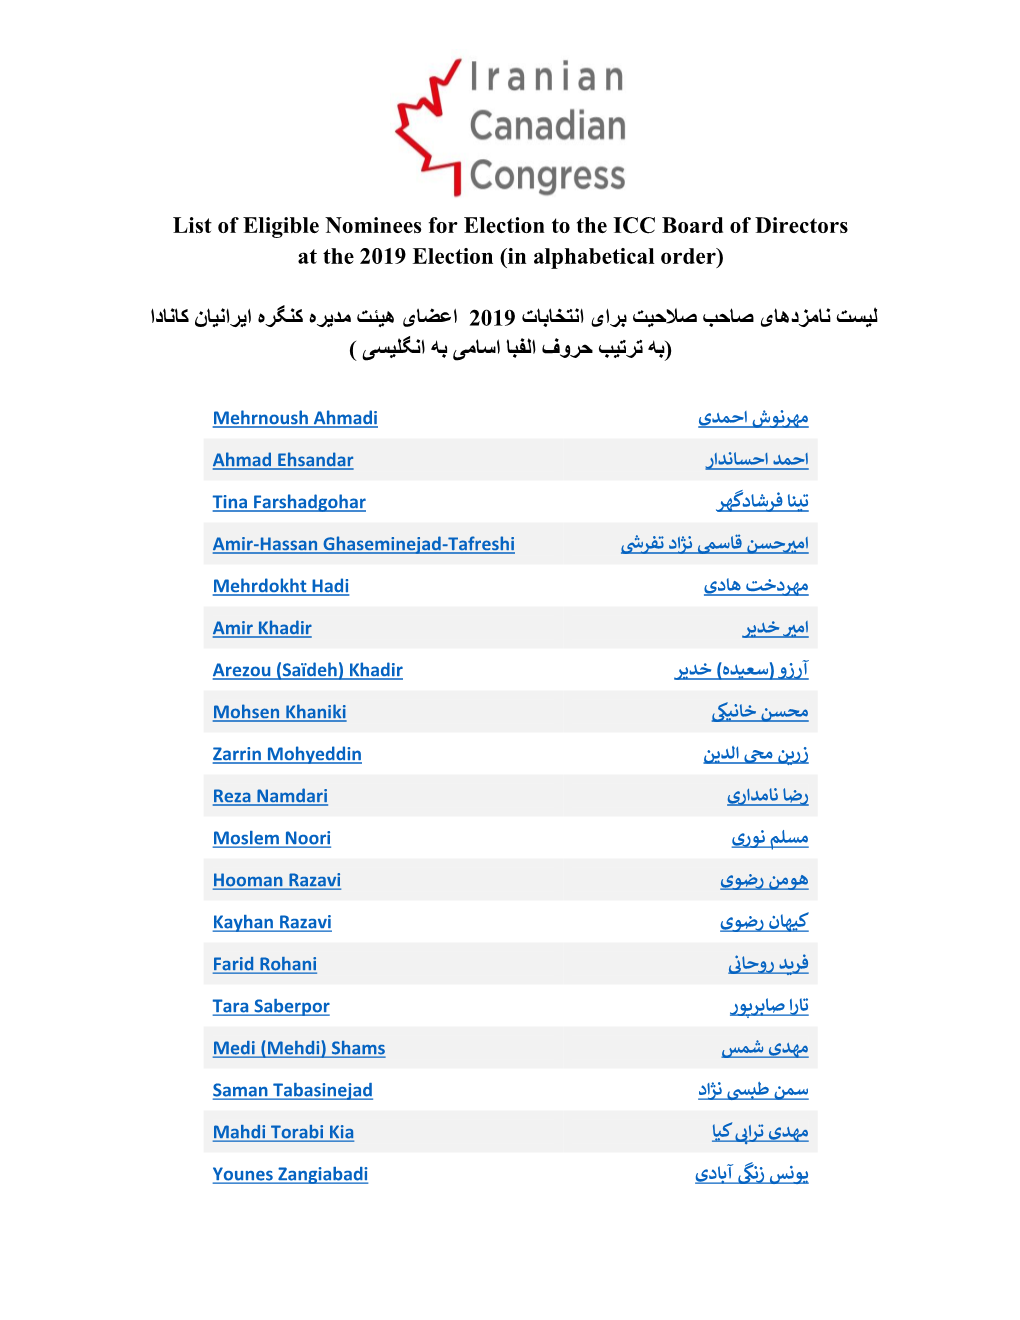 List of Eligible Nominees for Election to the ICC Board of Directors at the 2019 Election (In Alphabetical Order)